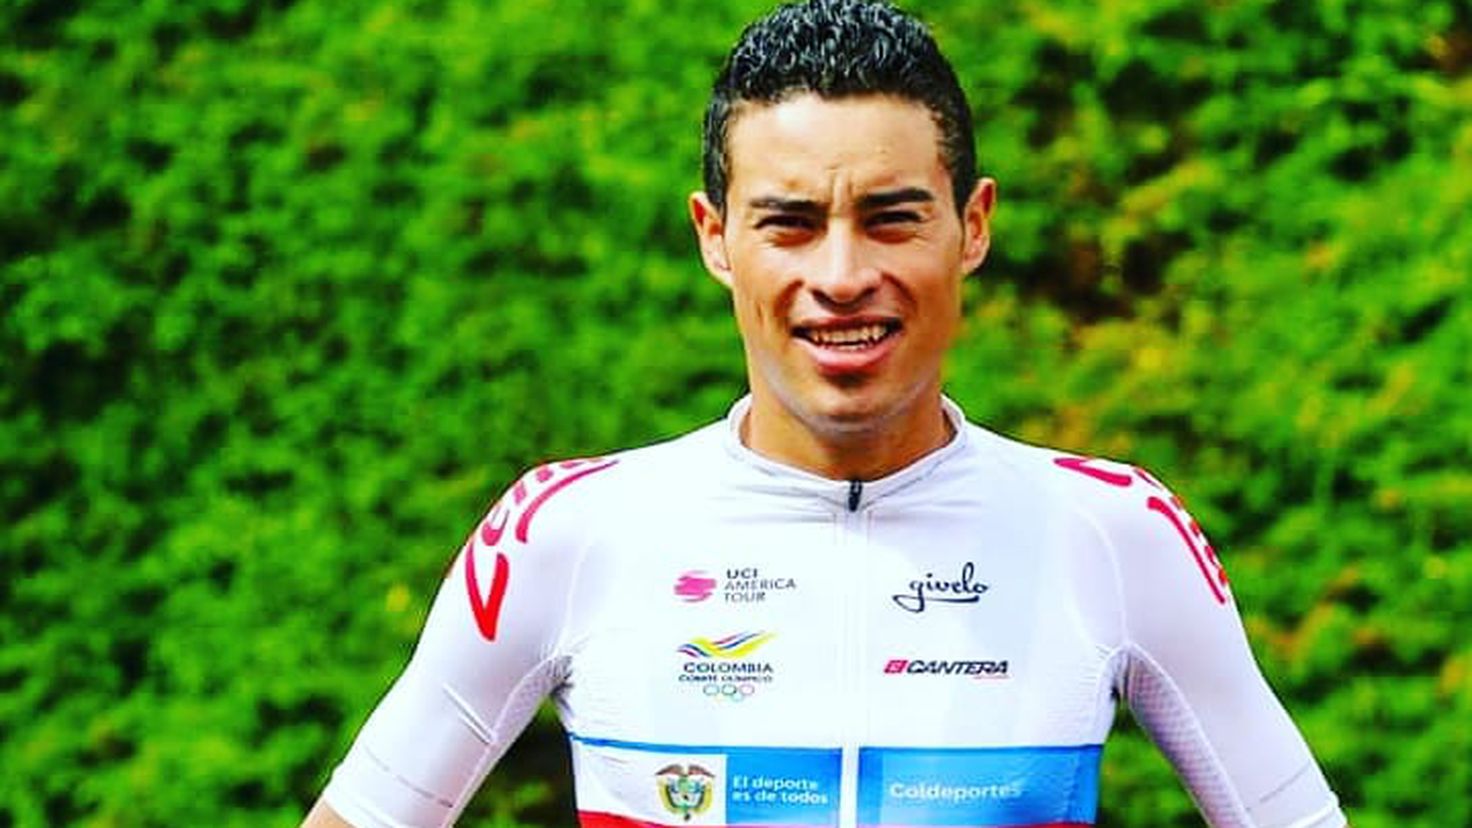 The cyclist Germán Chaves dies on the roads of Cundinamarca
